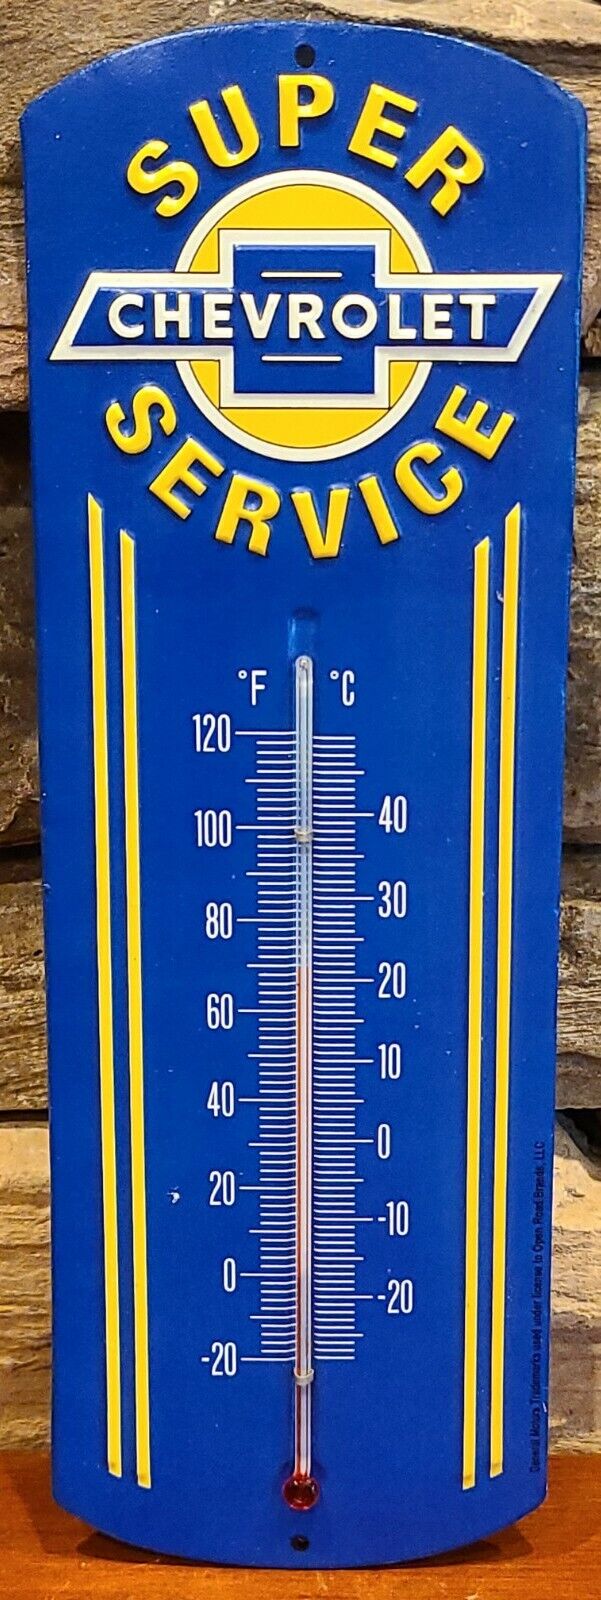 NEW Vintage Style Chevrolet Chevy Super Service Thermometer Mancave Garage 12\